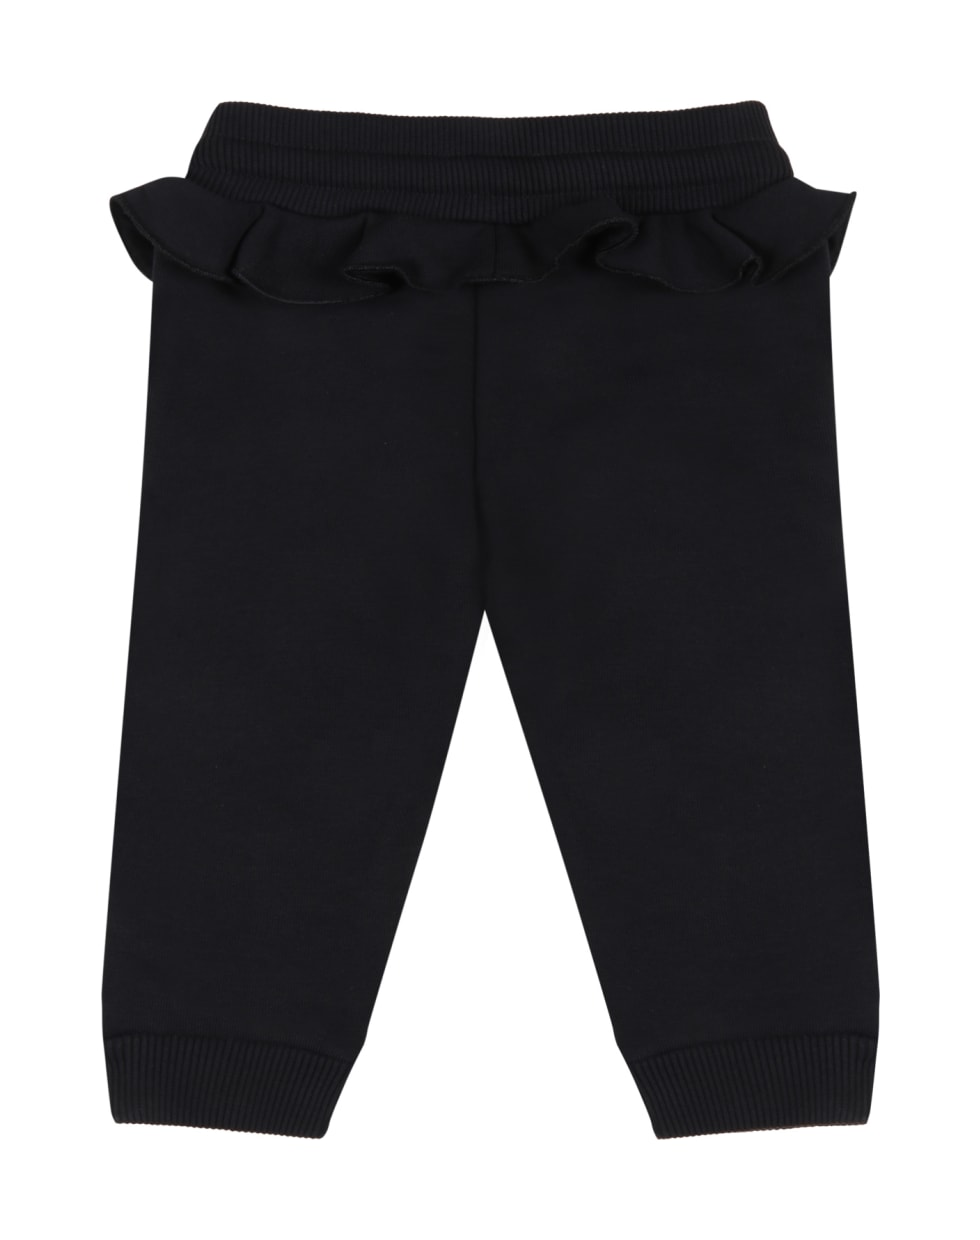 Givenchy Black Sweatpant For Baby Girl With Logo - Black